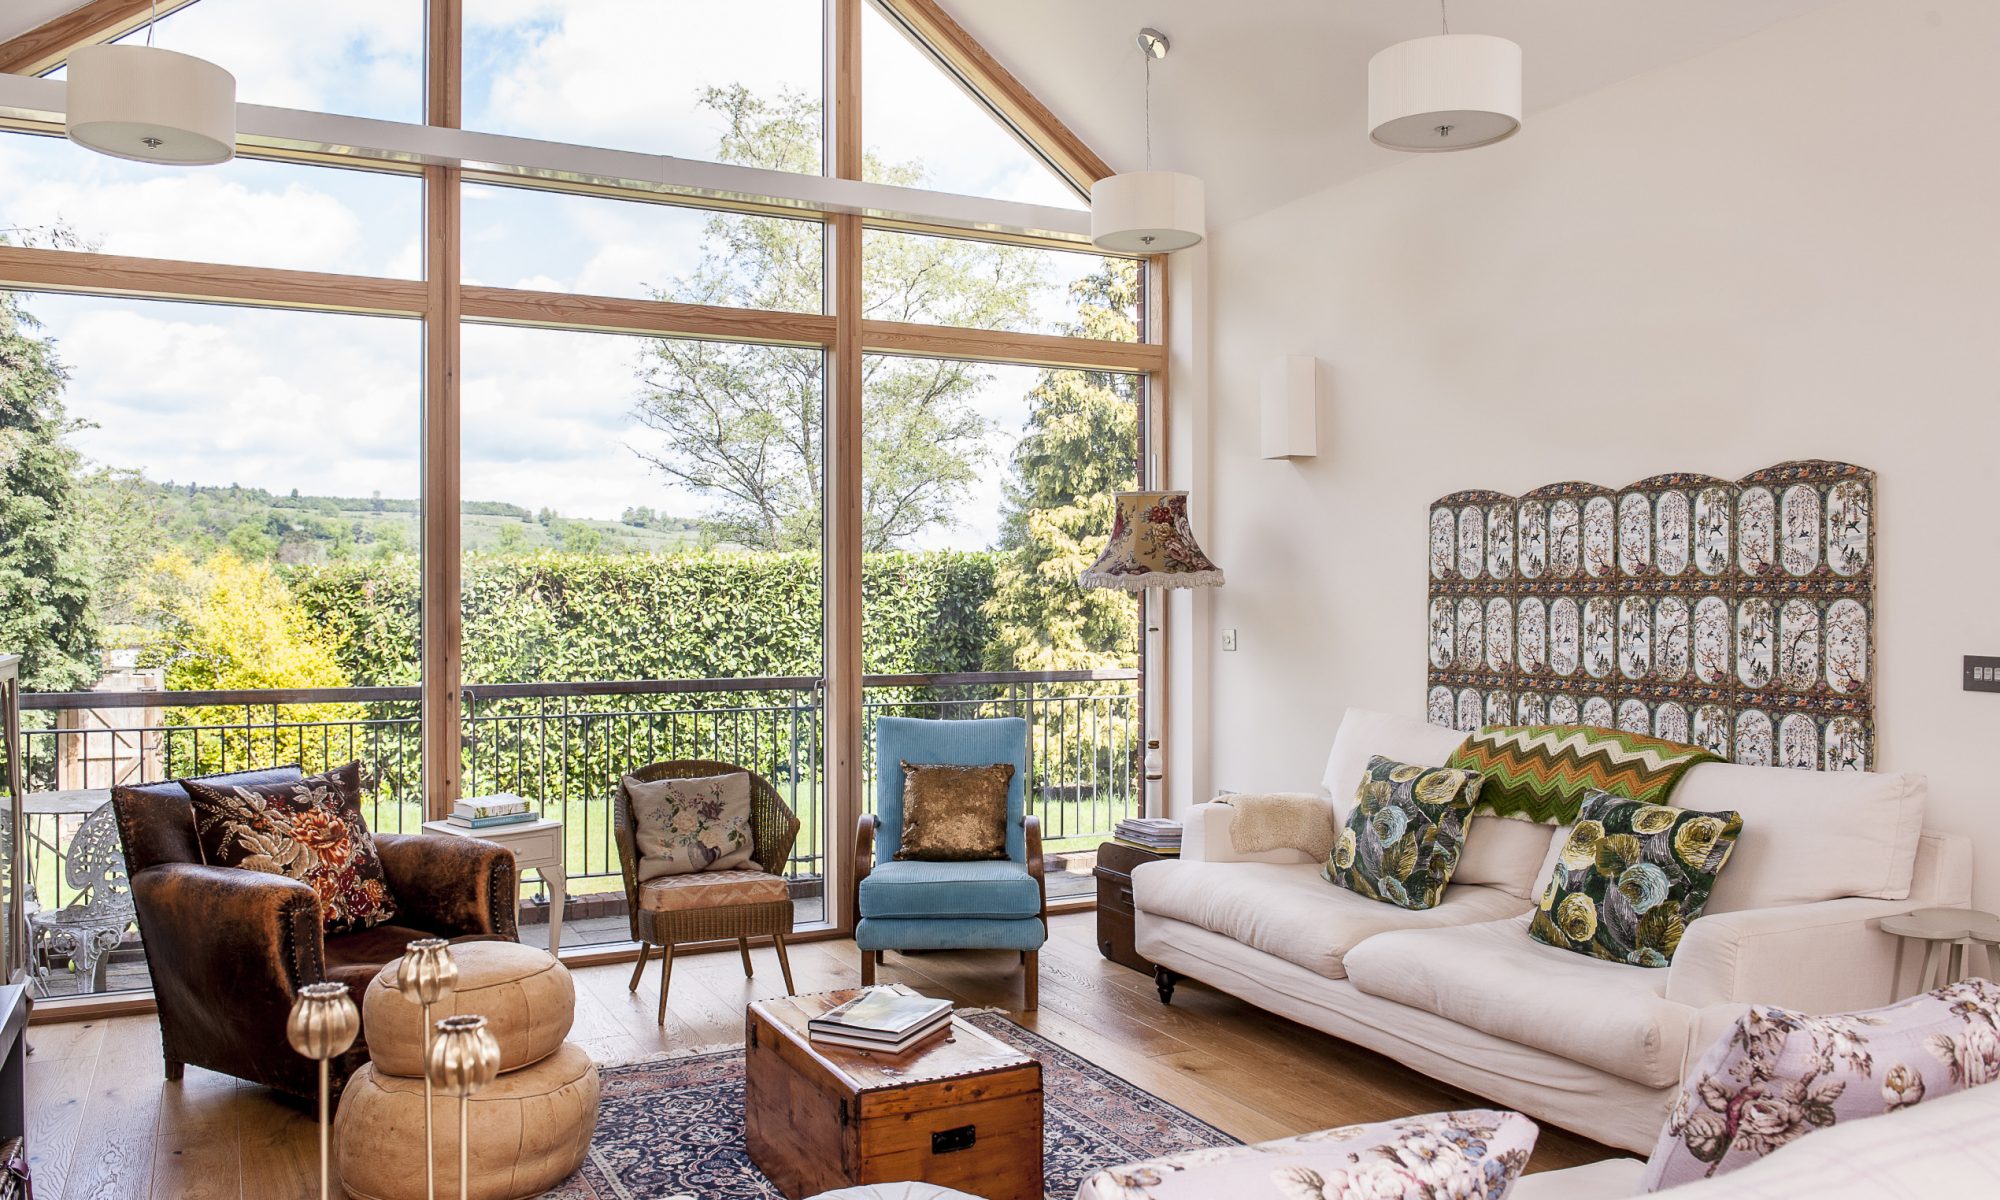 When Jenny and Doug Branson decided to make a move to Dorking they initially set their sights on Victorian properties. But for interior designer Jenny, a chance viewing of a new build property proved to be an irresistibly blank canvas...